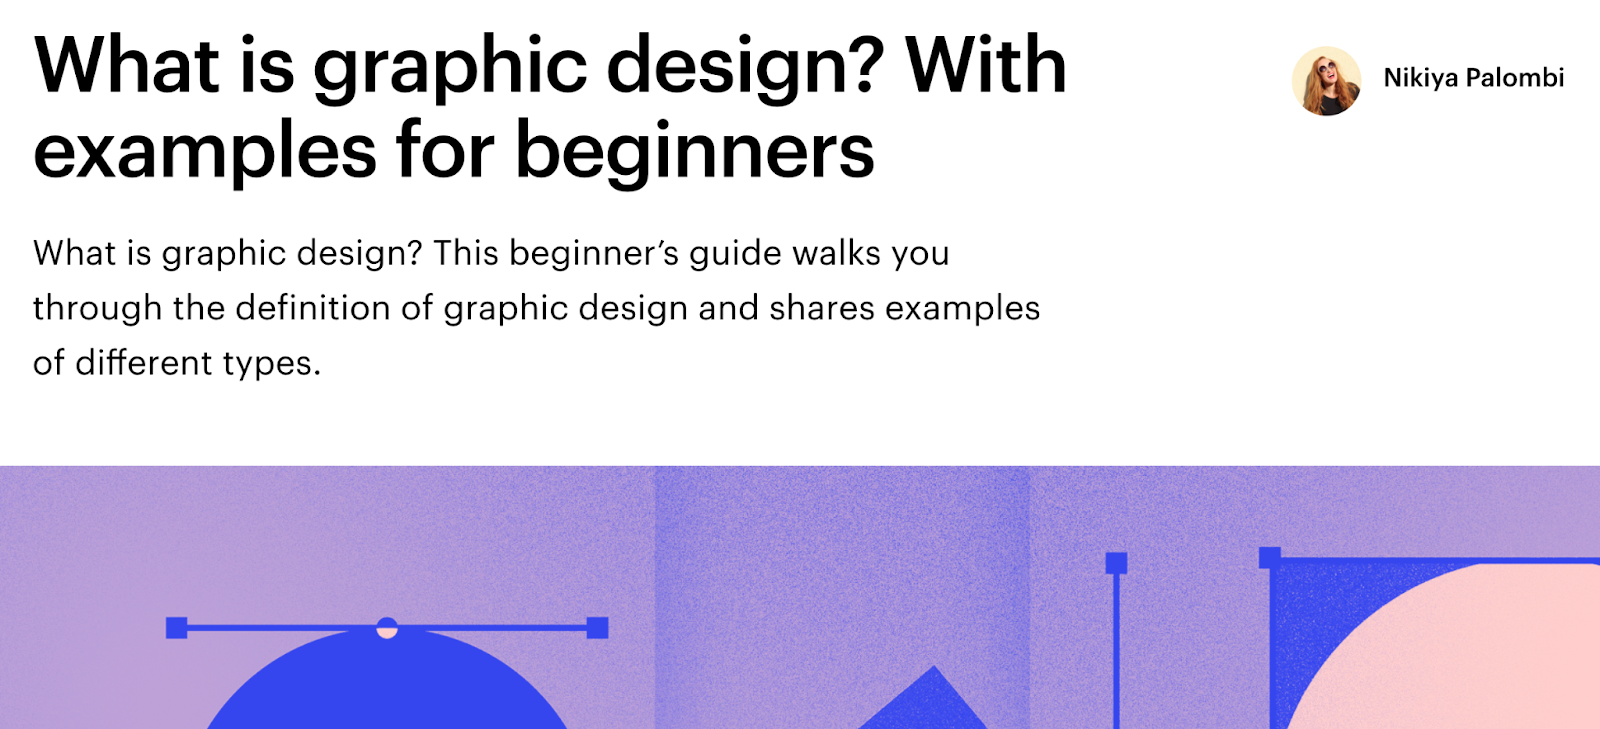 What is graphic design? with examples for beginners